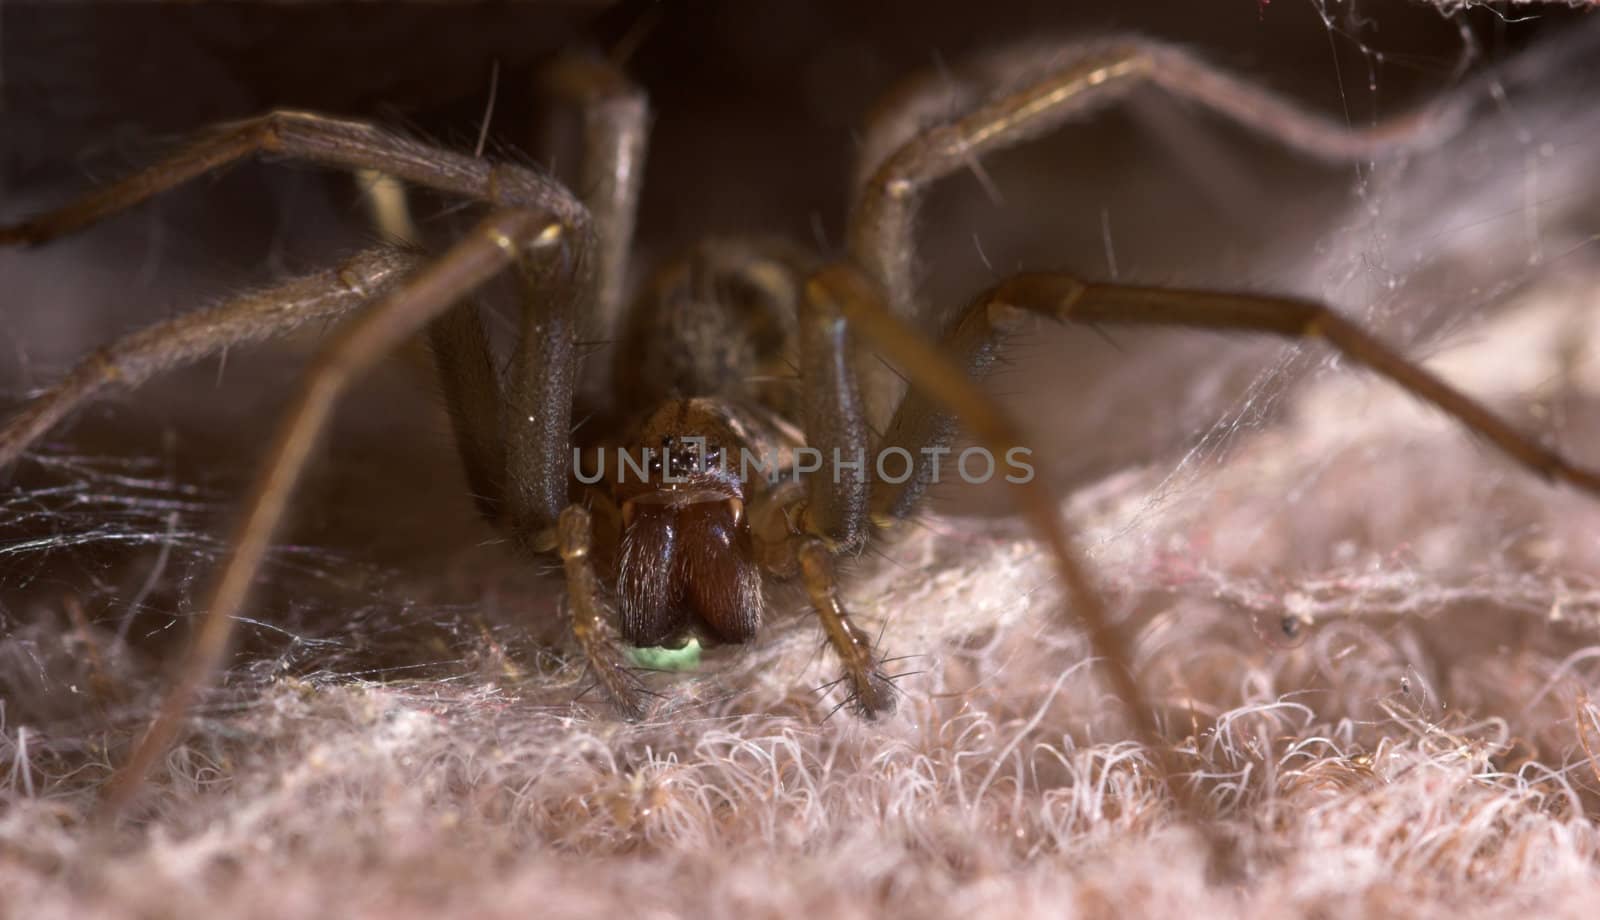 A spider with a venomously green glow under its pincers
